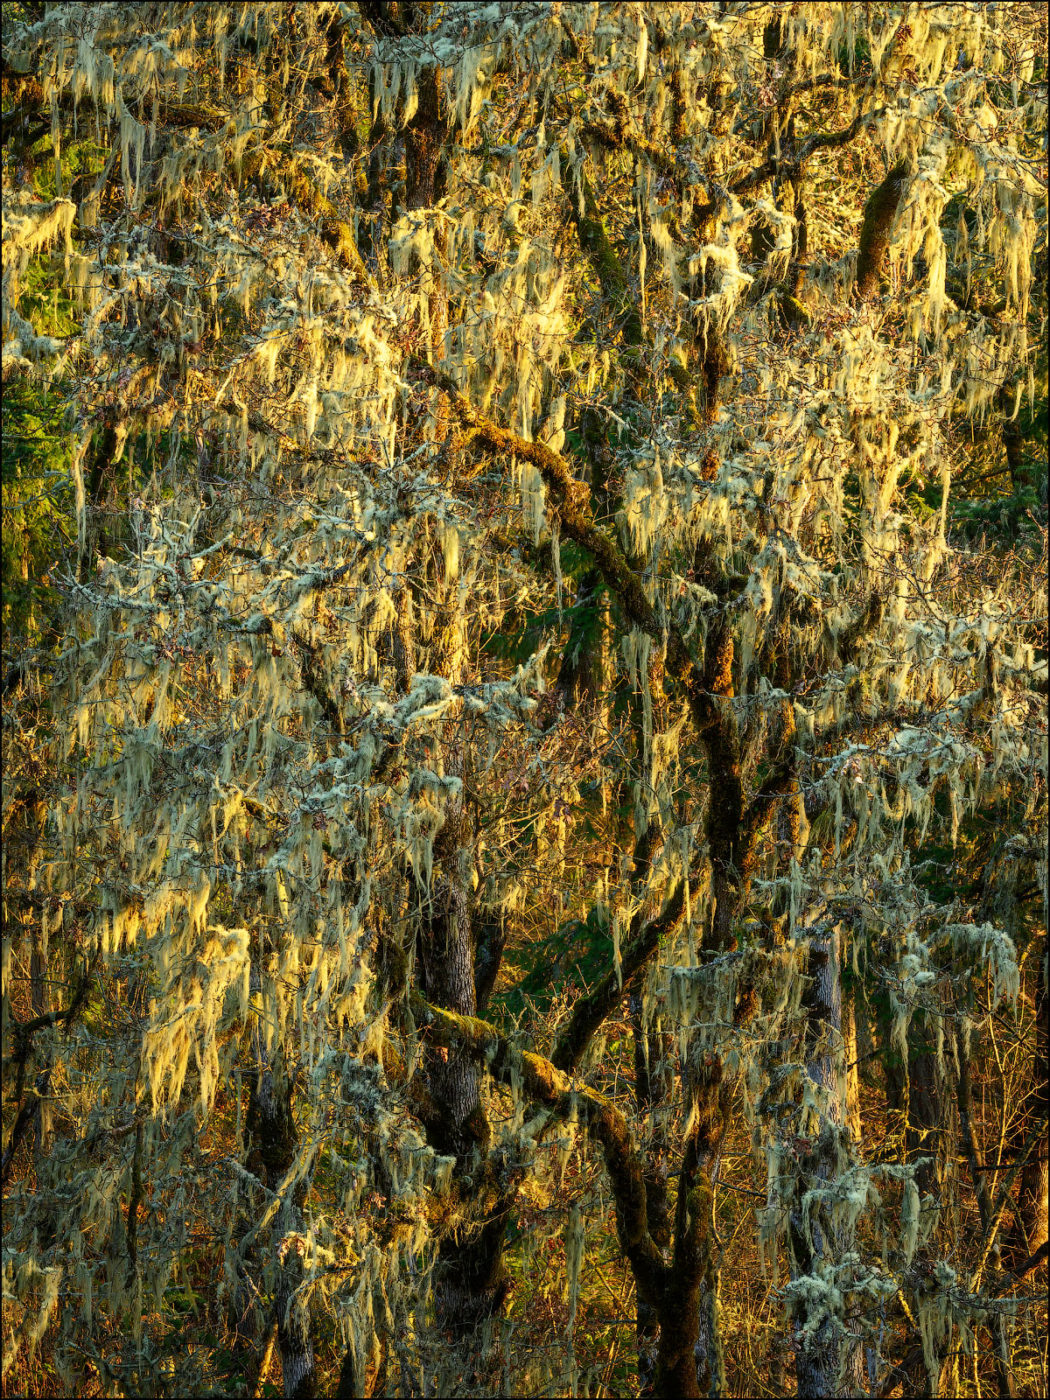 Oregon oak trees with lichen hanging on bare branches with warm afternoon light.